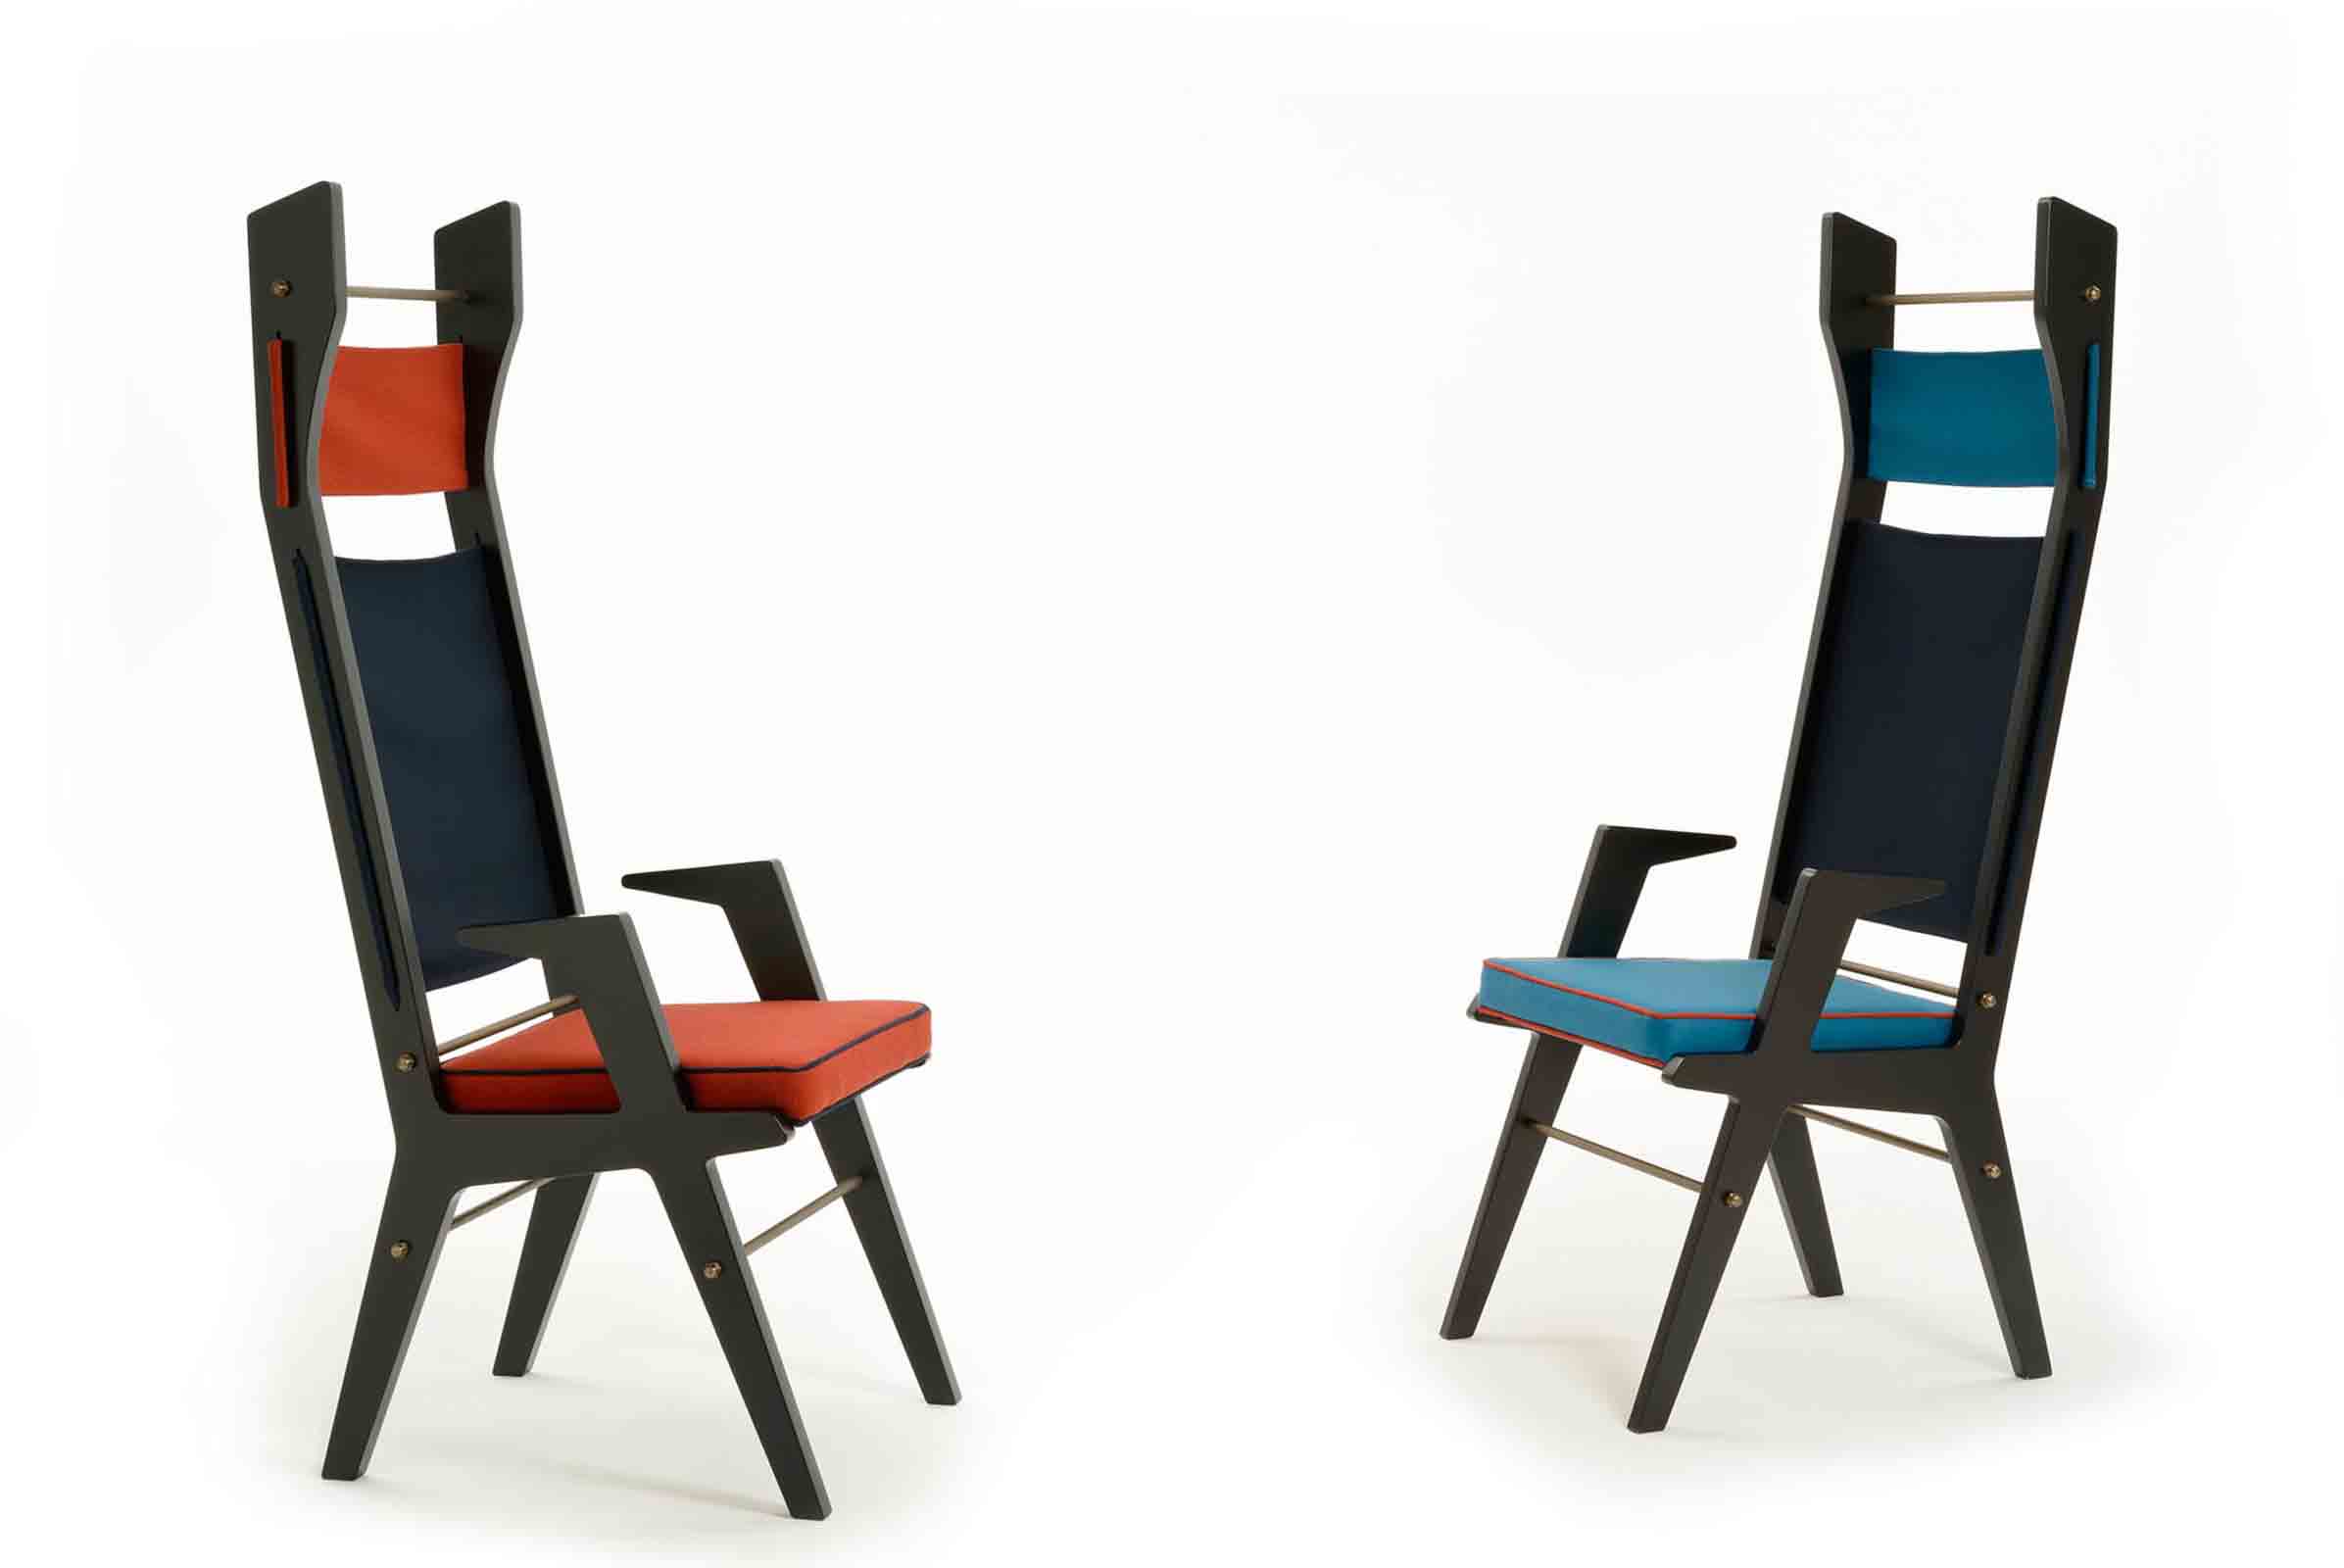 ‘Colette’ chairs designed by Lorenza Bozzoli for Cole on display at Design Junction